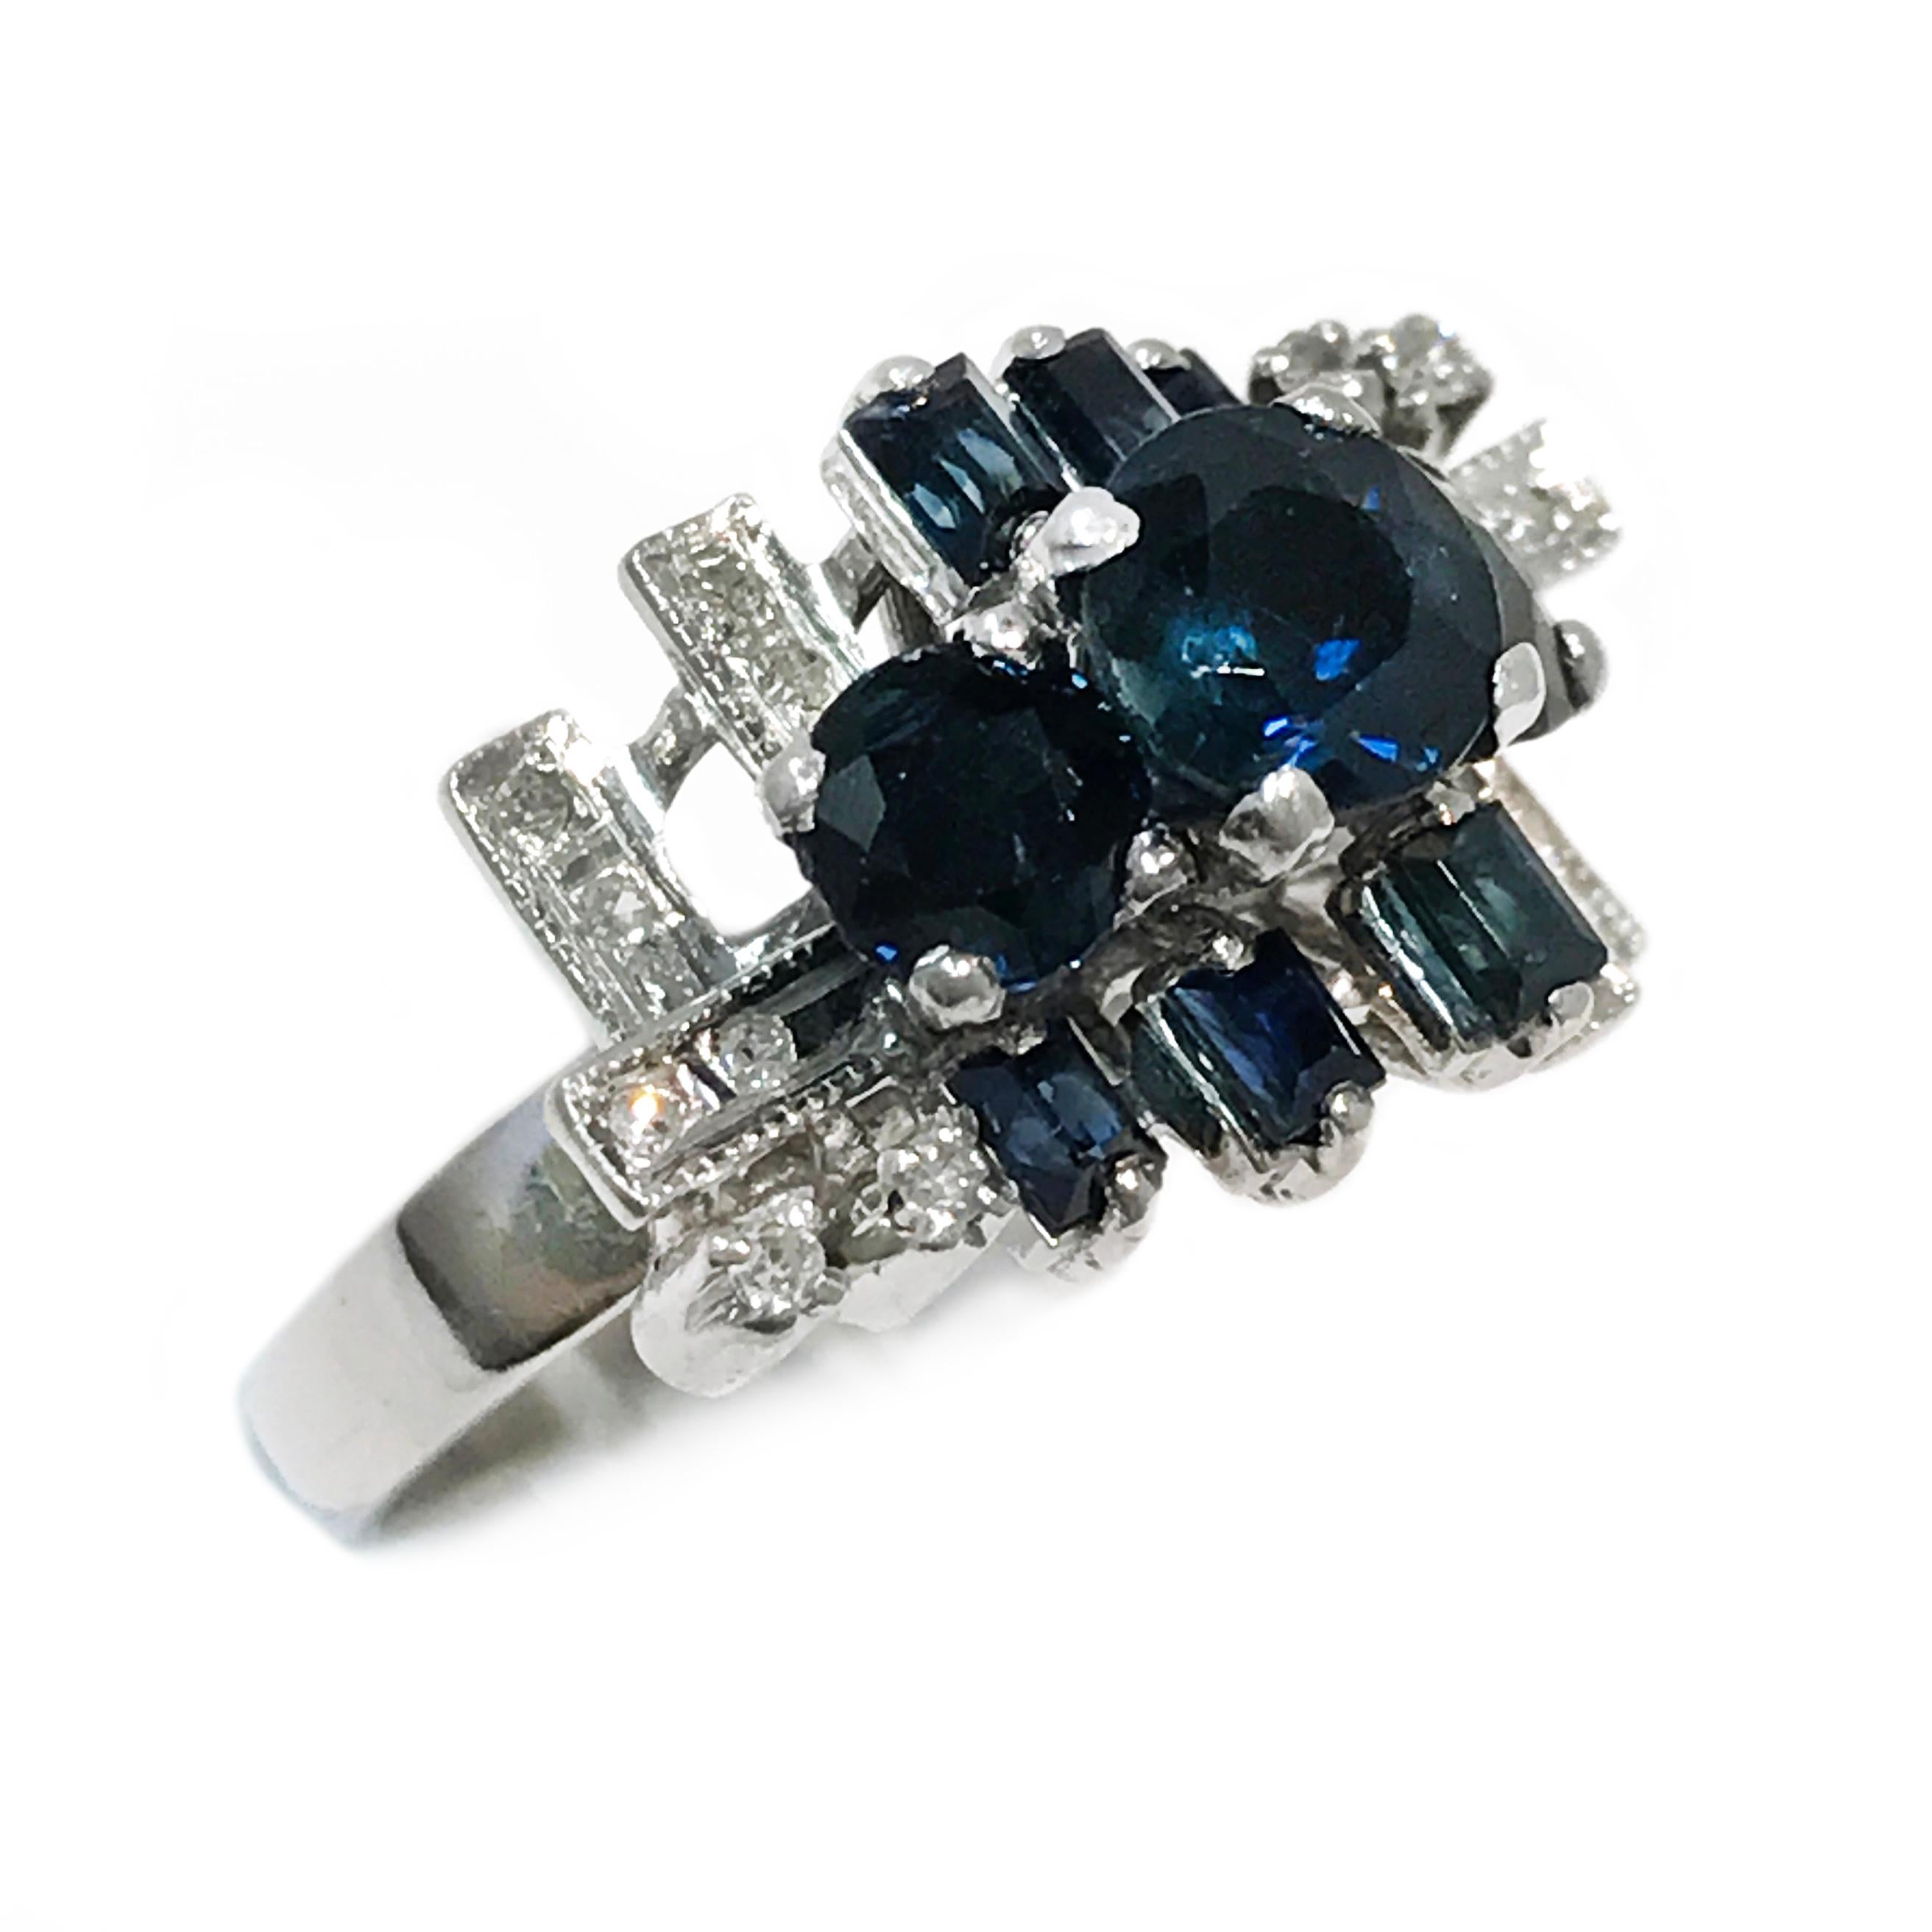 Vintage 18 karat white gold blue sapphire and diamond statement ring. The center round sapphire measures 5.77mm for a carat weight of 0.70ct. Two smaller round sapphires measure 4.64mm and six baguette sapphires for a total carat weight of 0.80tcw.